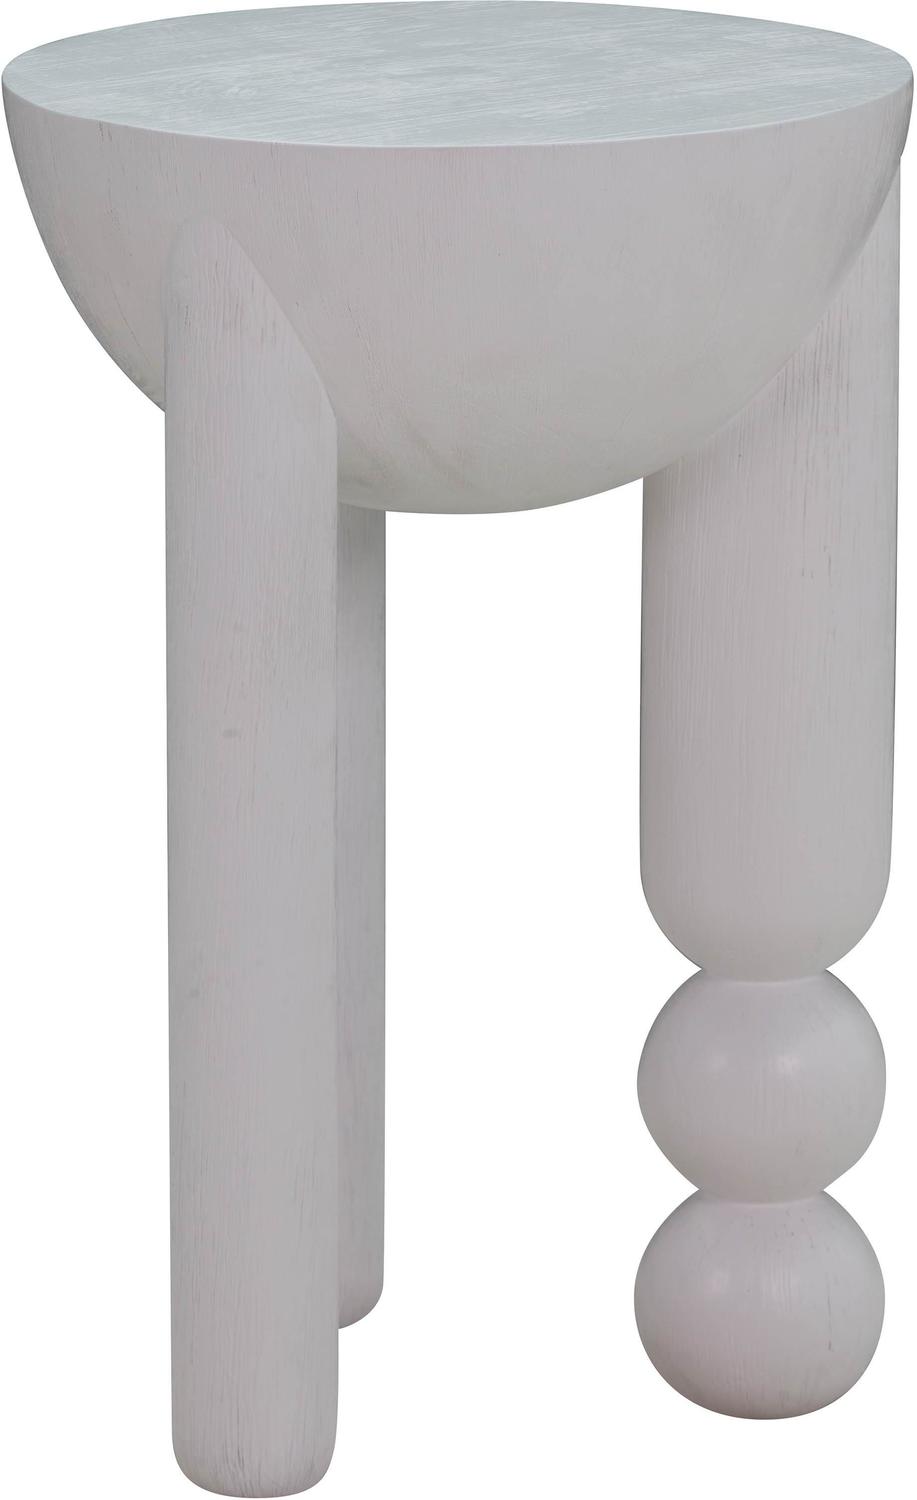 hallway table Contemporary Design Furniture Side Tables White